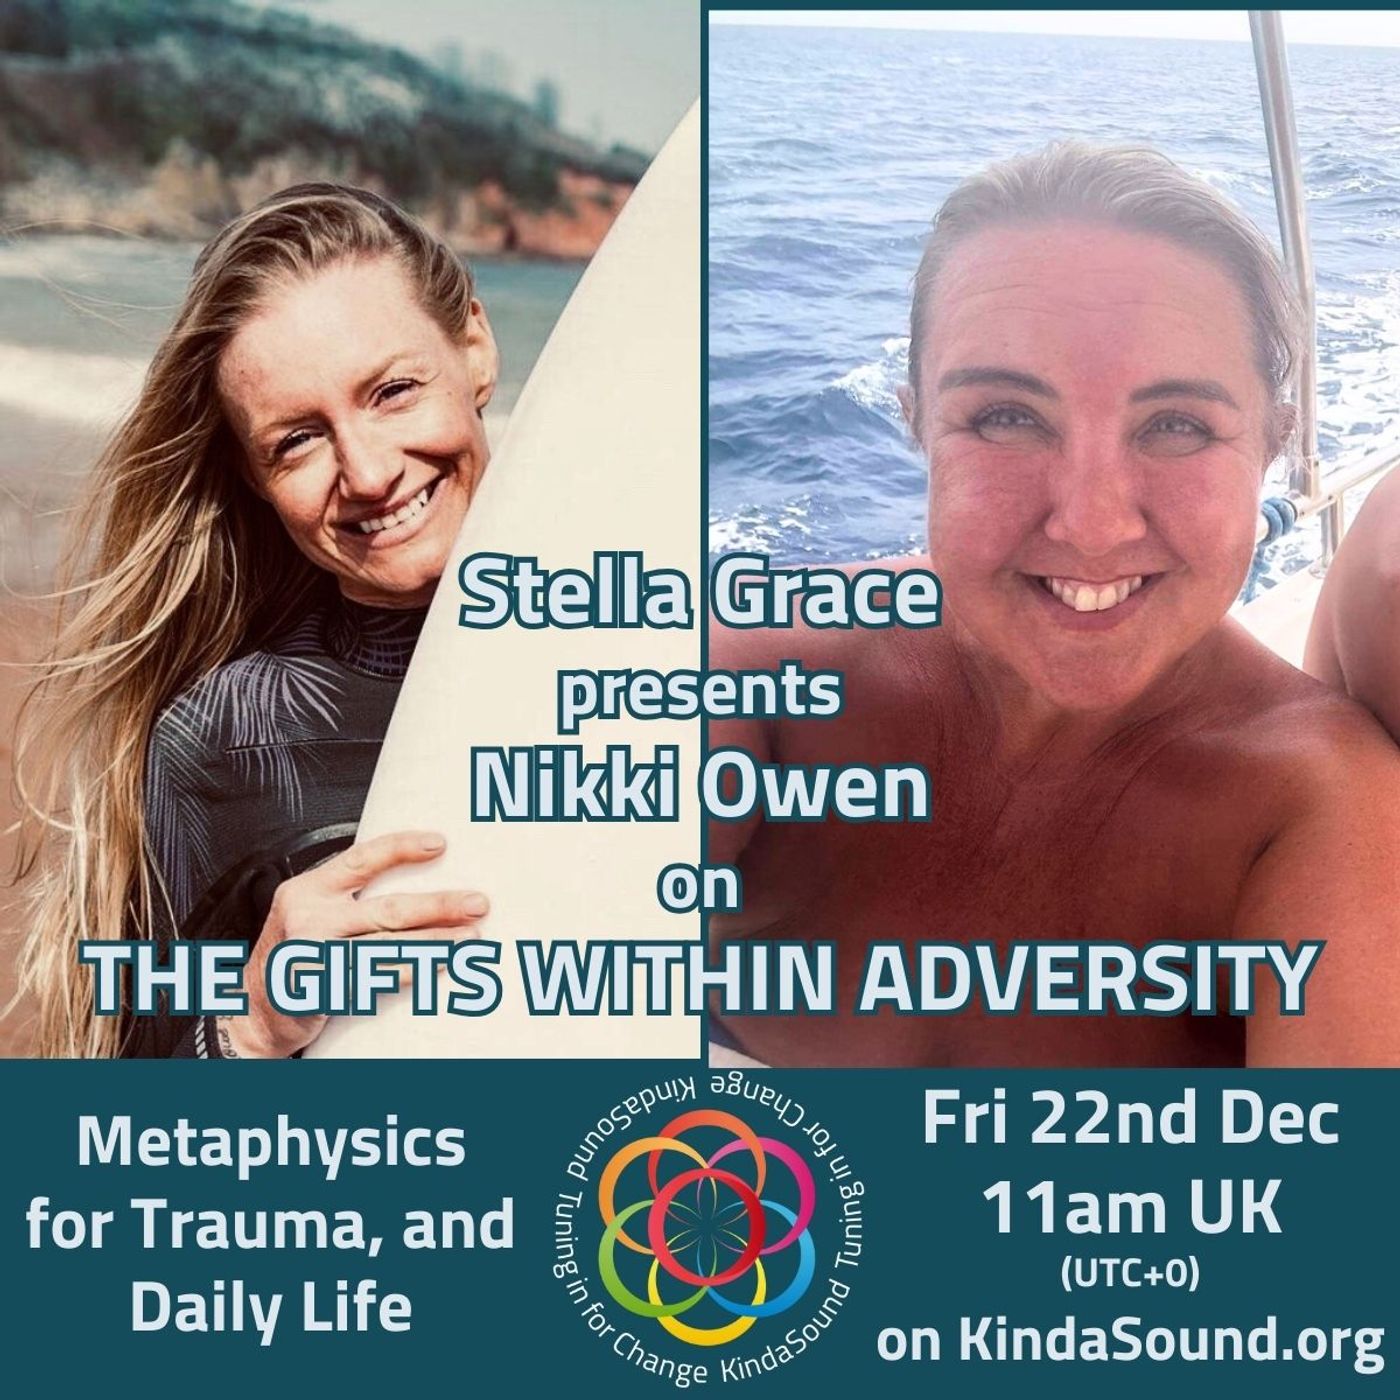 Metaphysics for Trauma, and Life! | Nikki Owen on The Gifts Within Adversity with Stella Grace